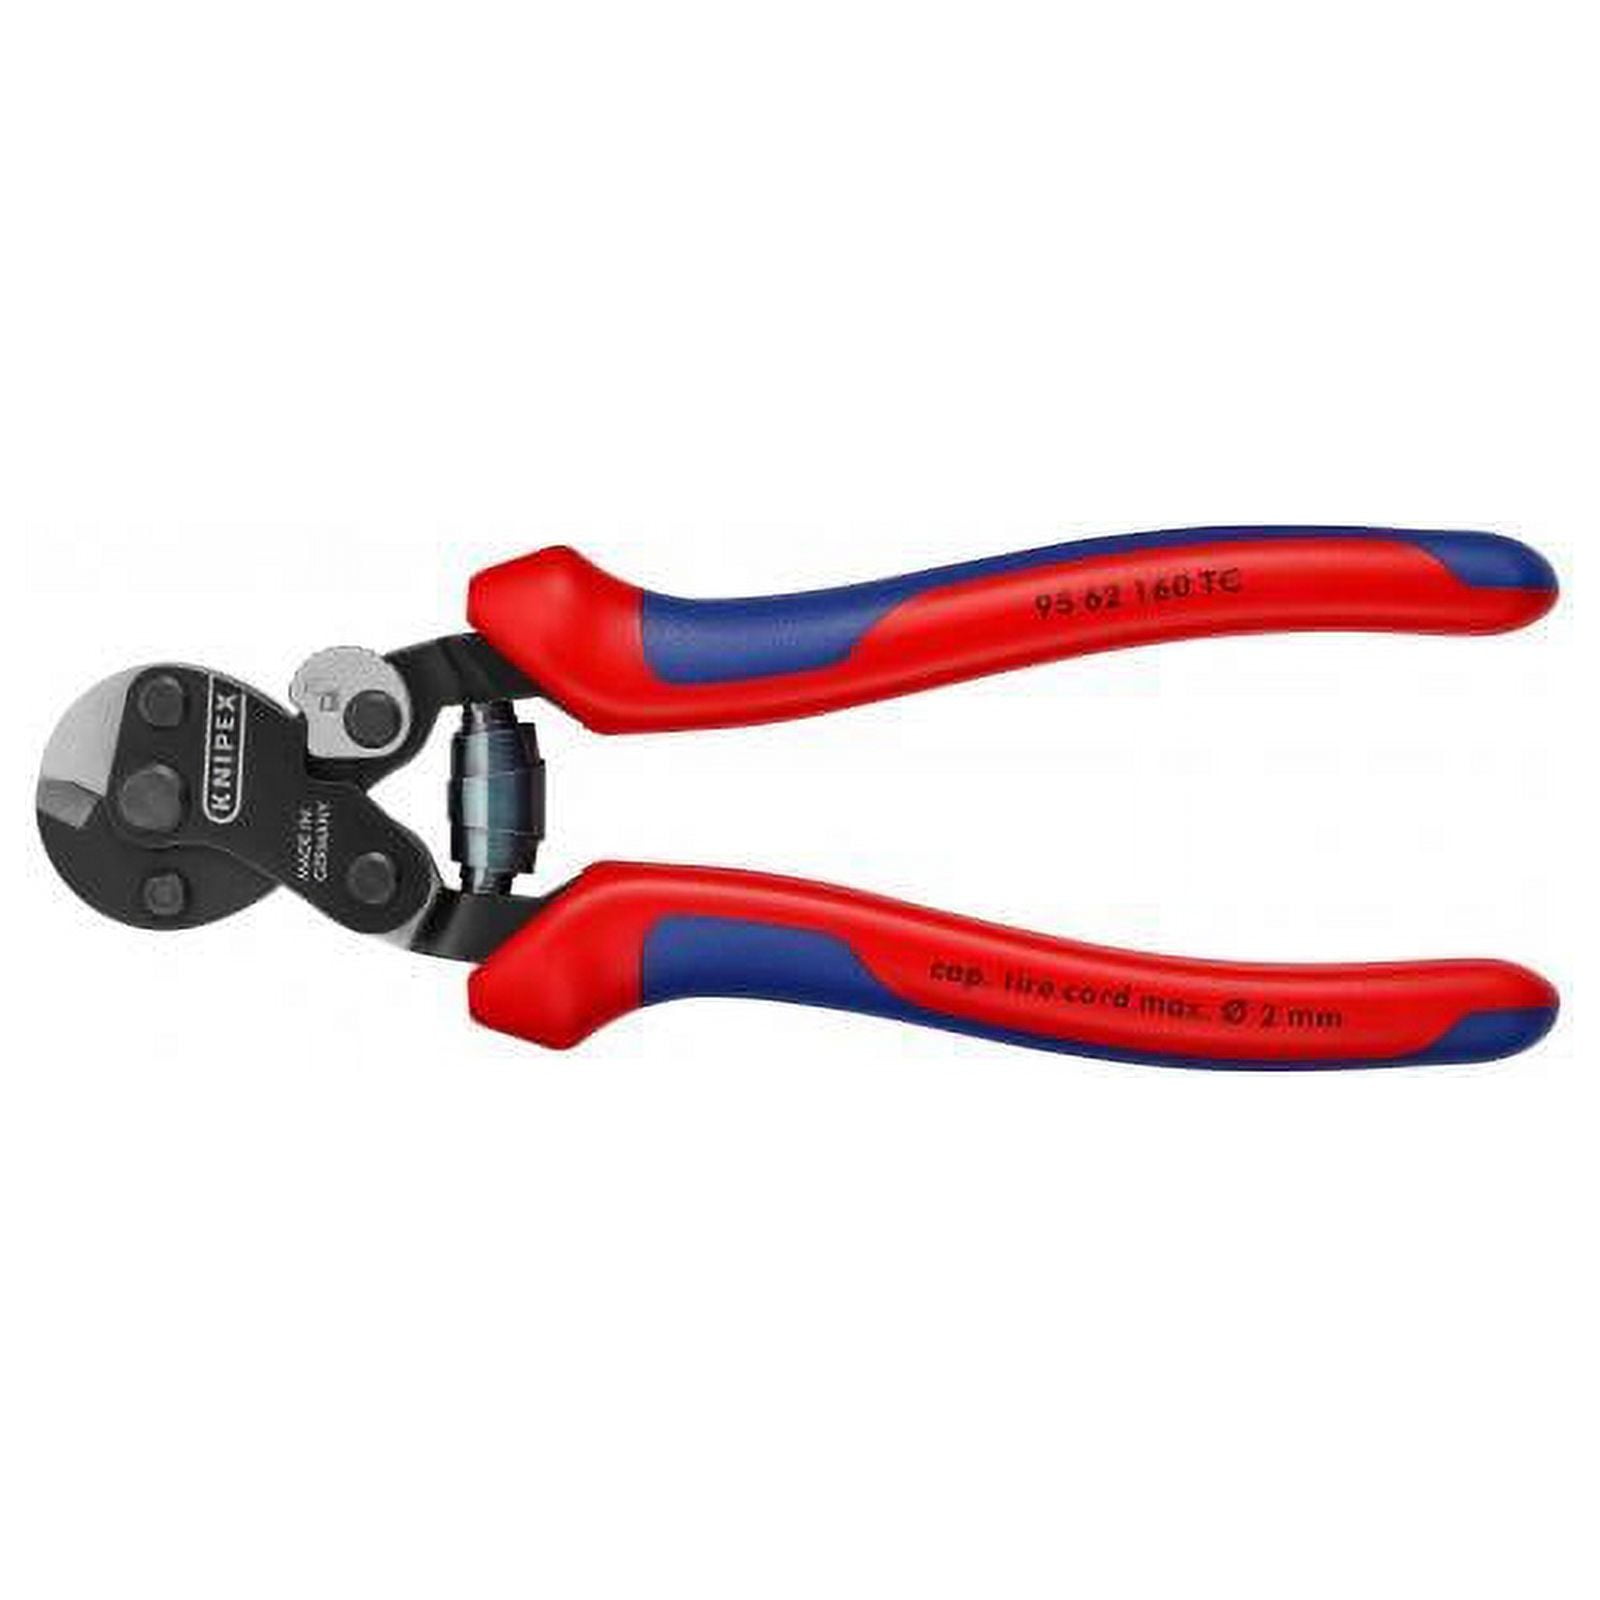 Knipex 95 62 160 6 1/4 Wire Rope Shears-Tire Cord Cutter